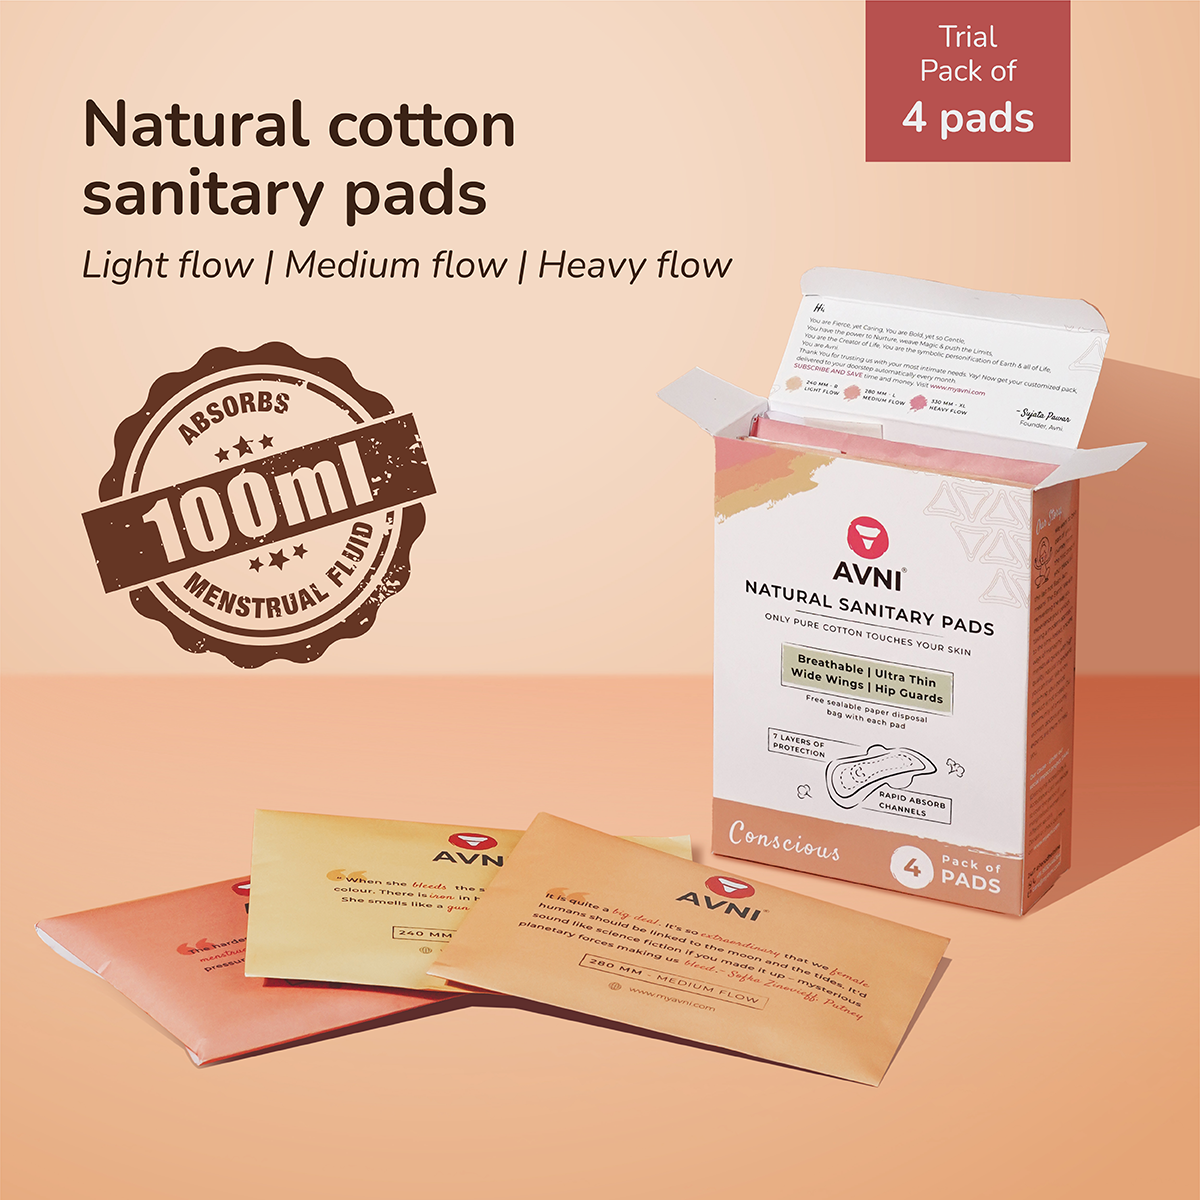 Natural Cotton Sanitary Pads - Trial Pack of 4 Pads